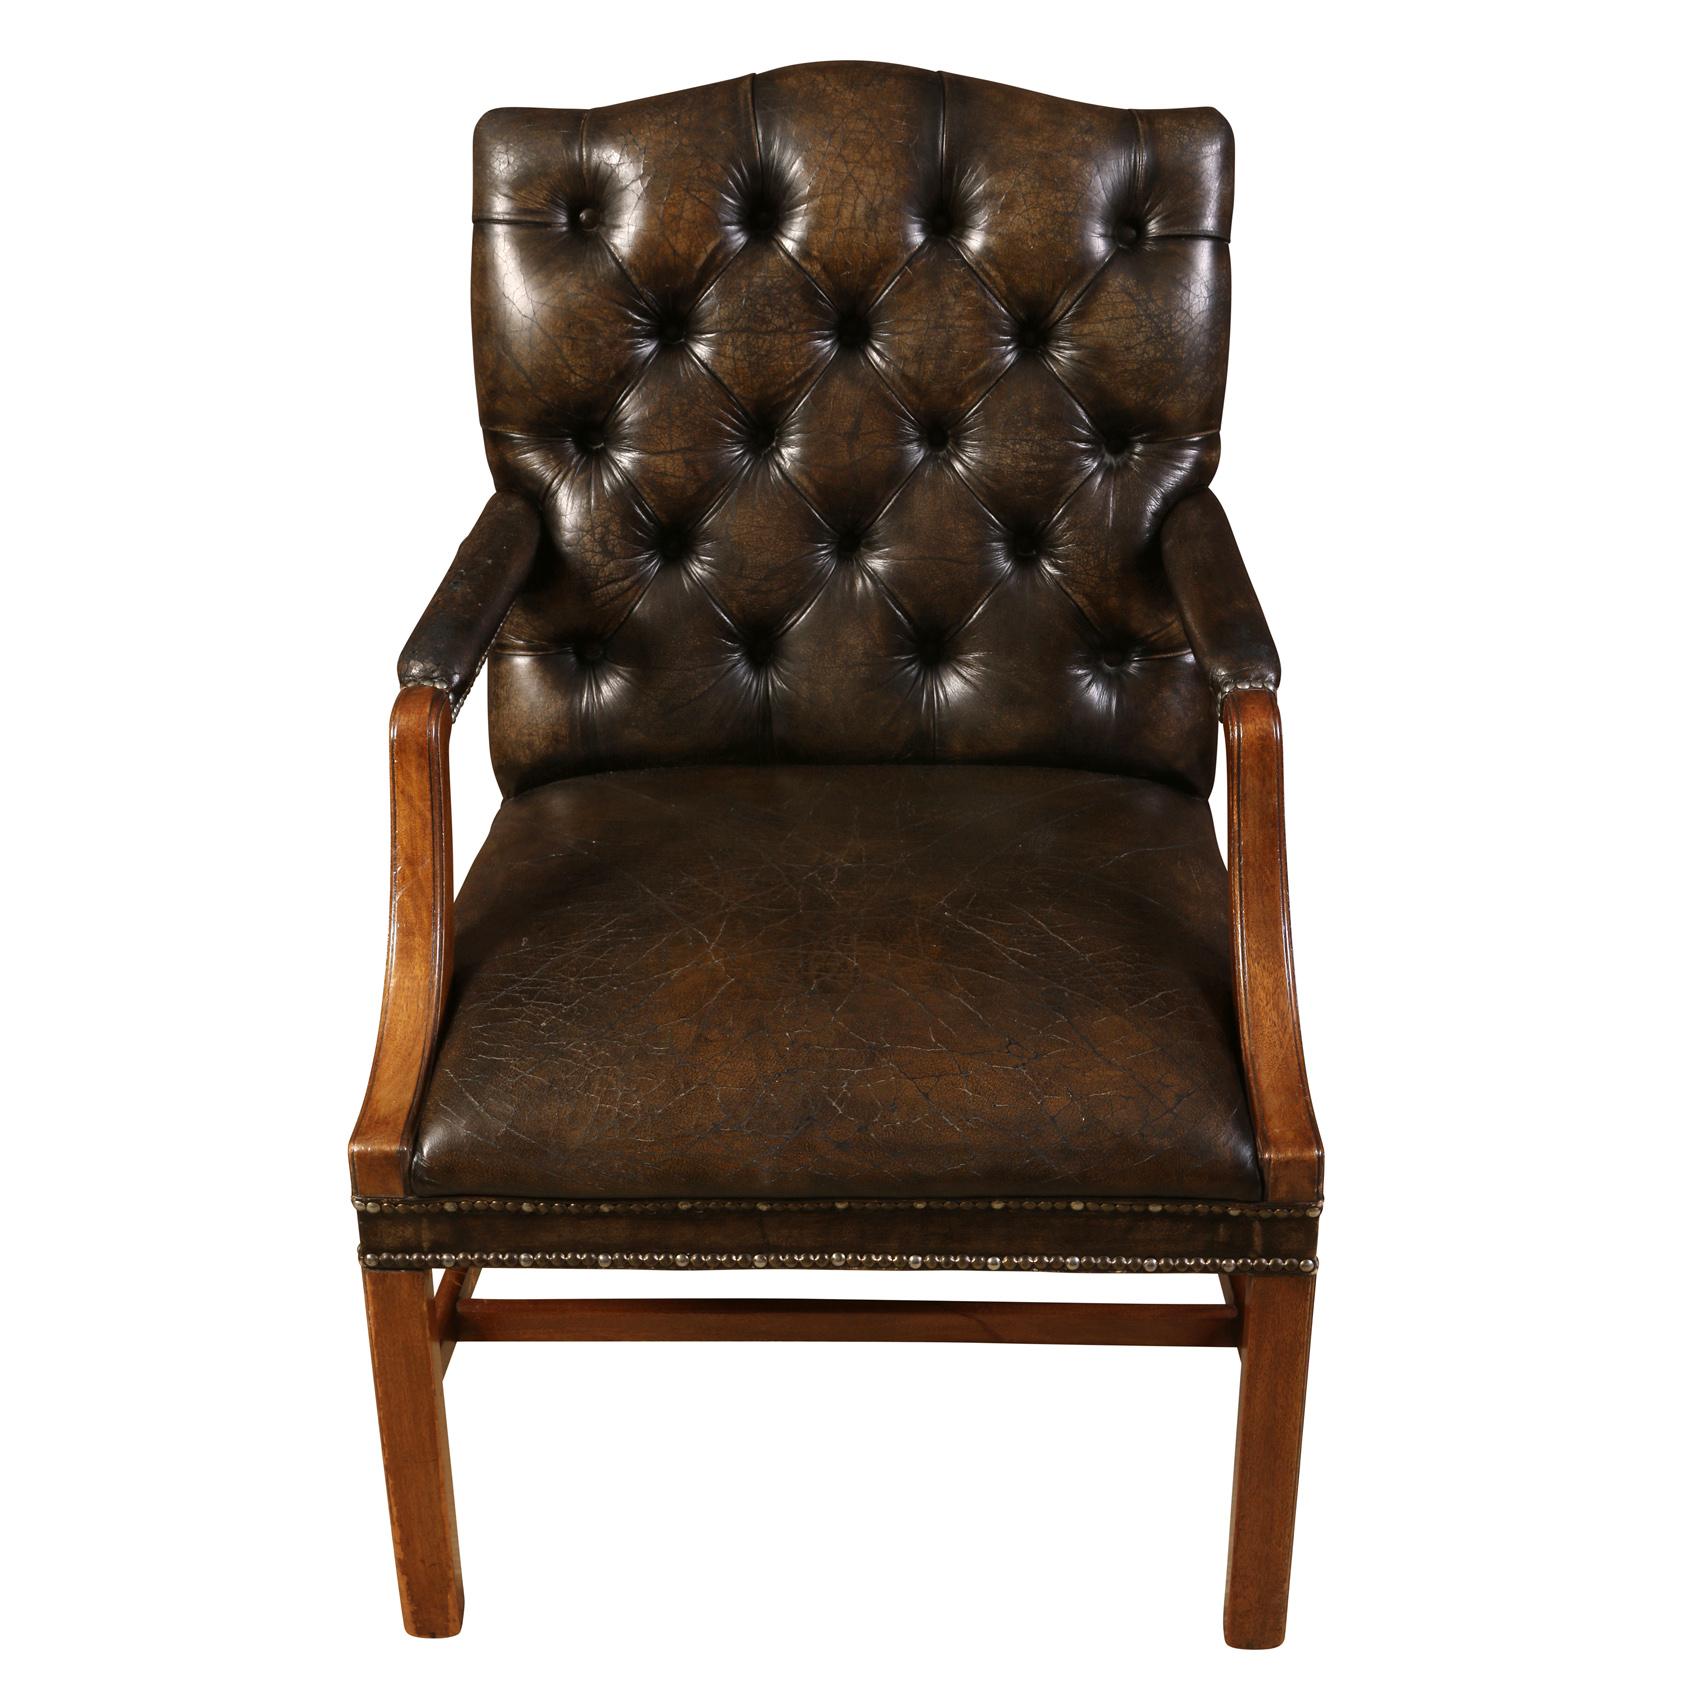 A pair of vintage, Georgian style, patinated leather tufted back arm chairs.  The brown leather features intentional distress marks to the seat which suit the antique, aged appearance.  The chair frames date to early 20th Century and the leather